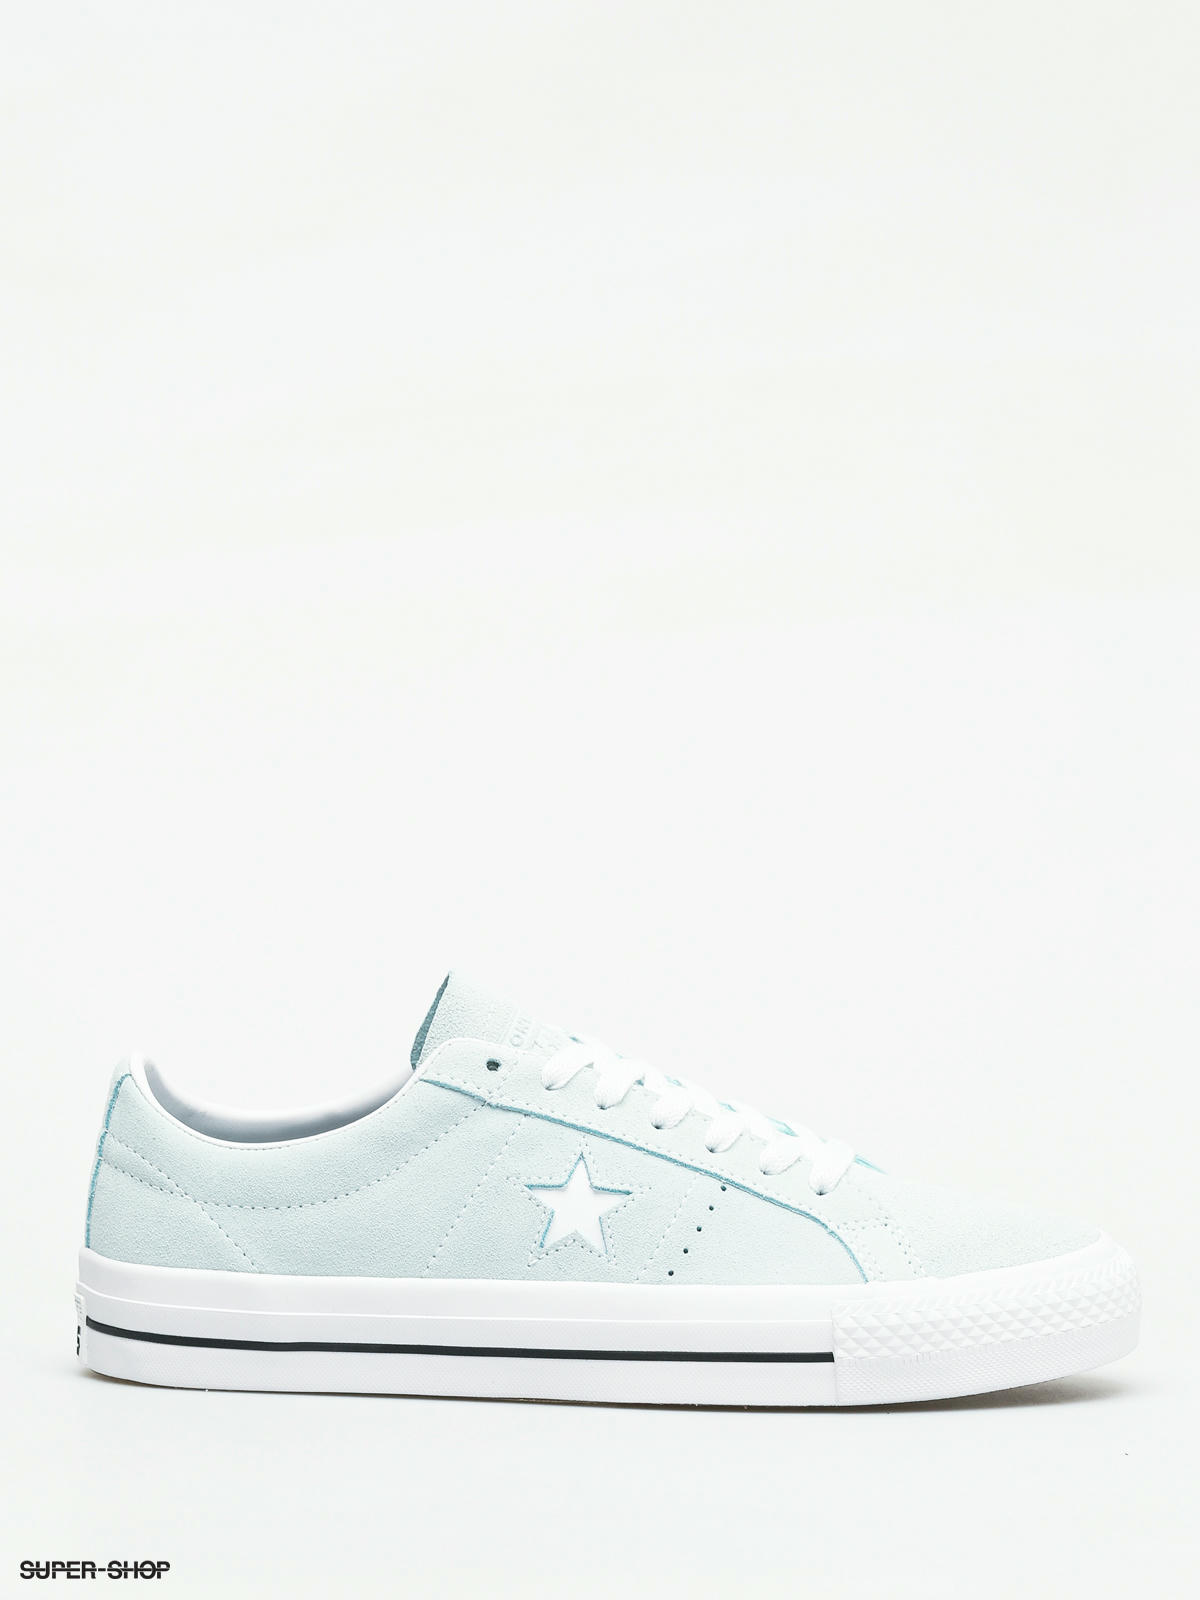 converse one star teal